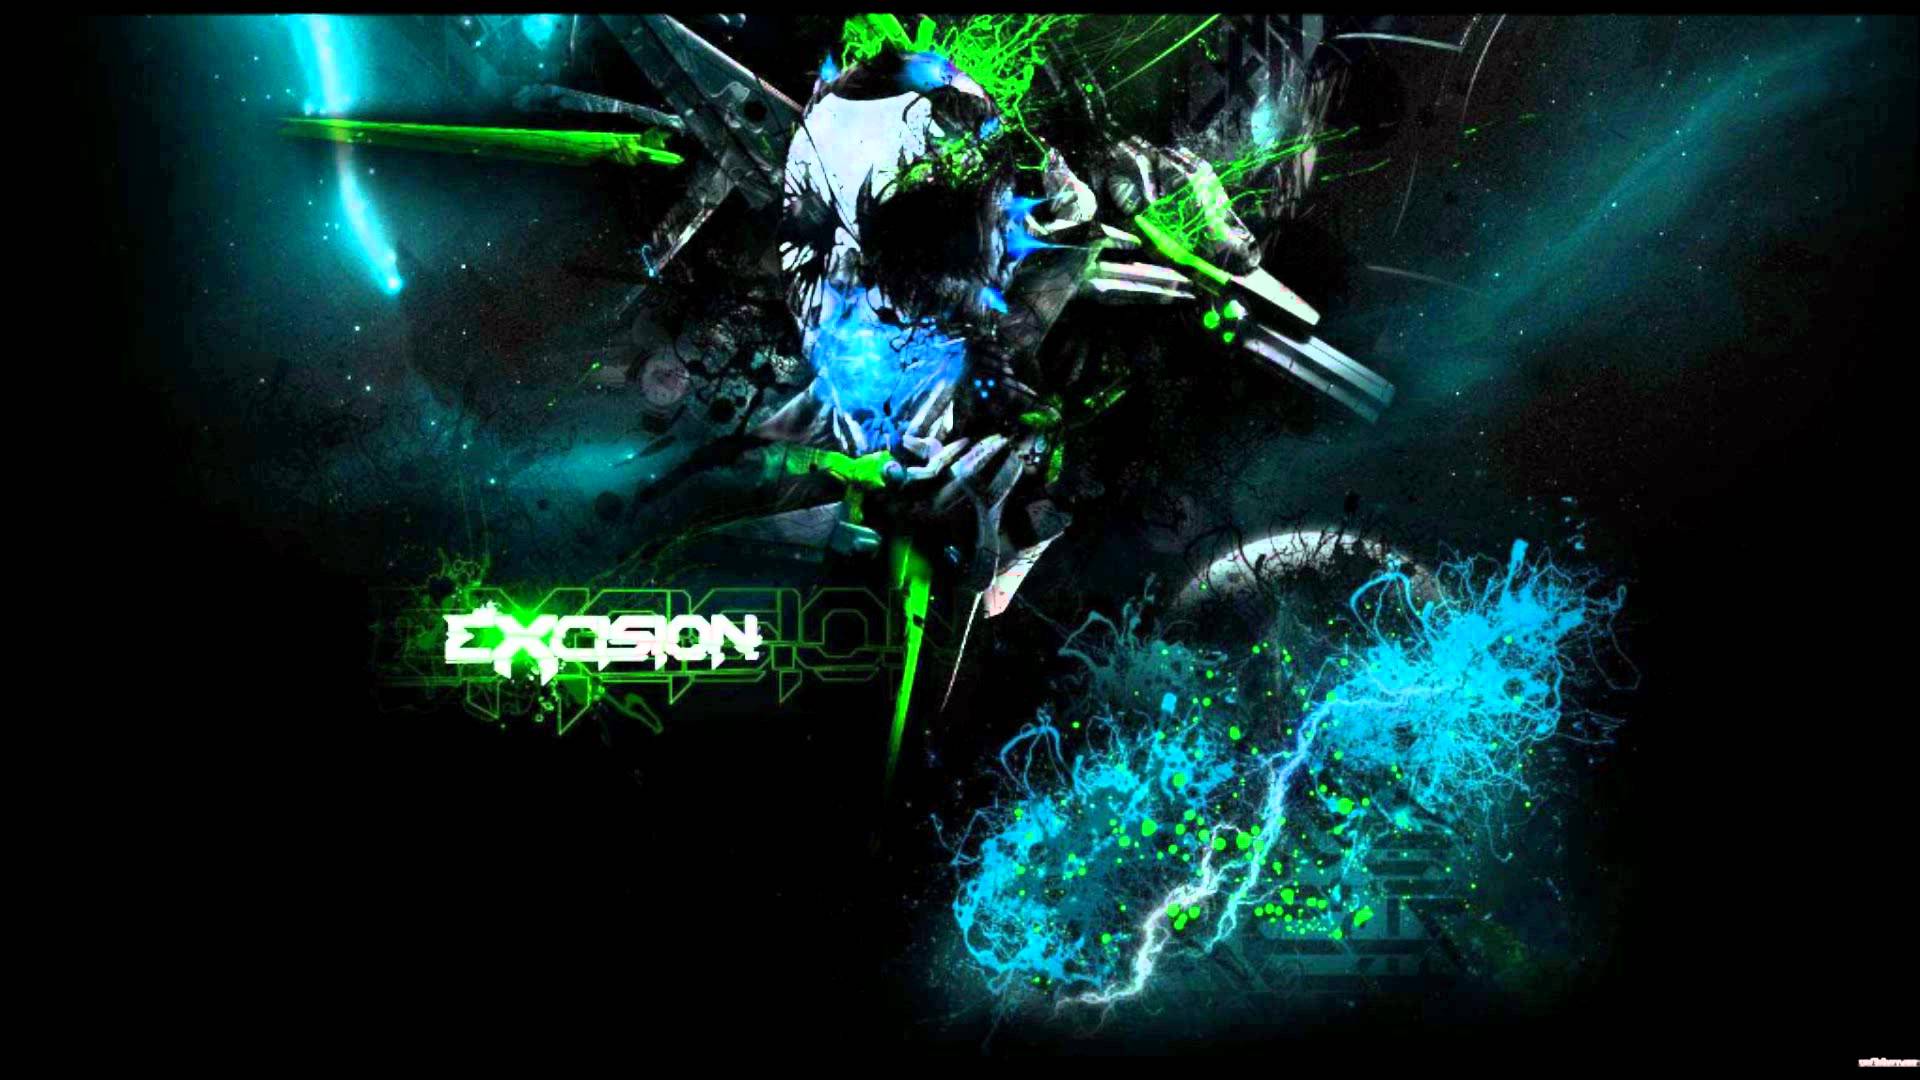 Wallpaper For > Excision Wallpaper 1080p